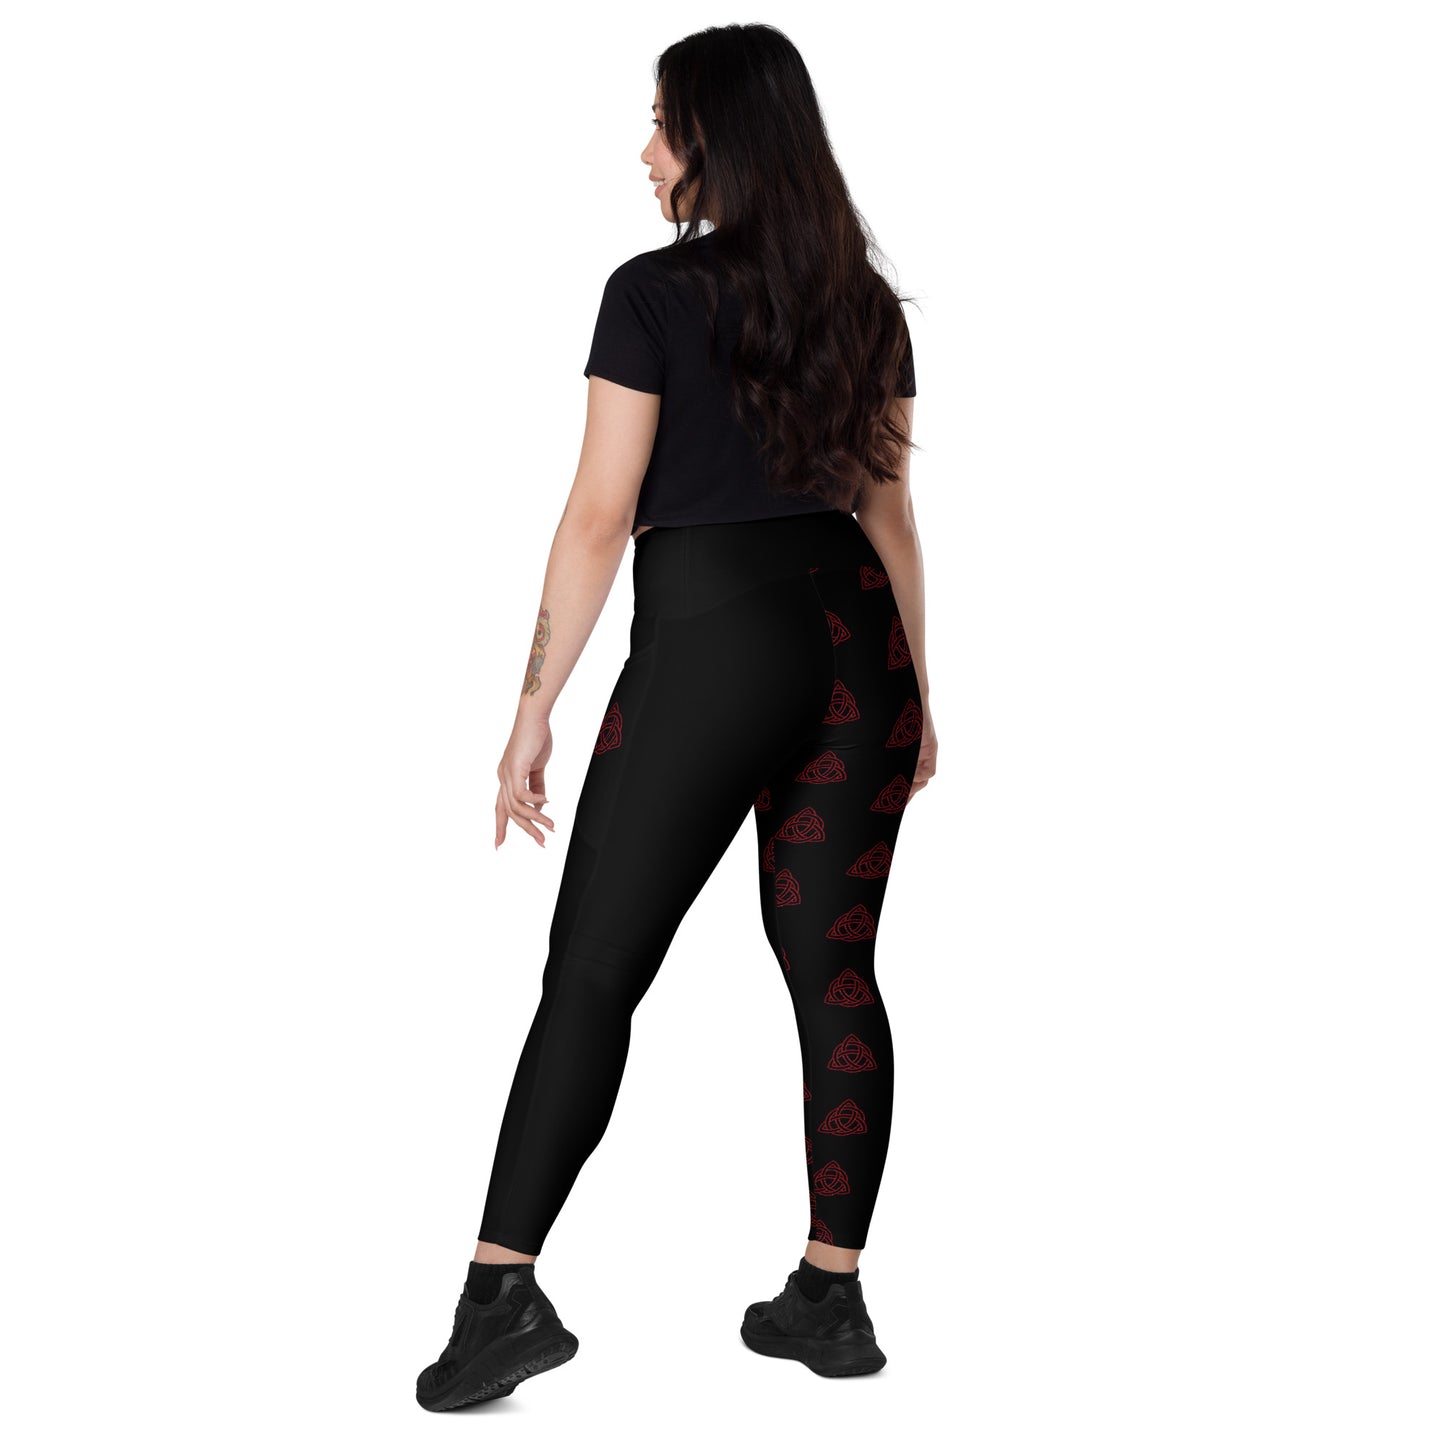 Celtic Red knot half Legging with pockets